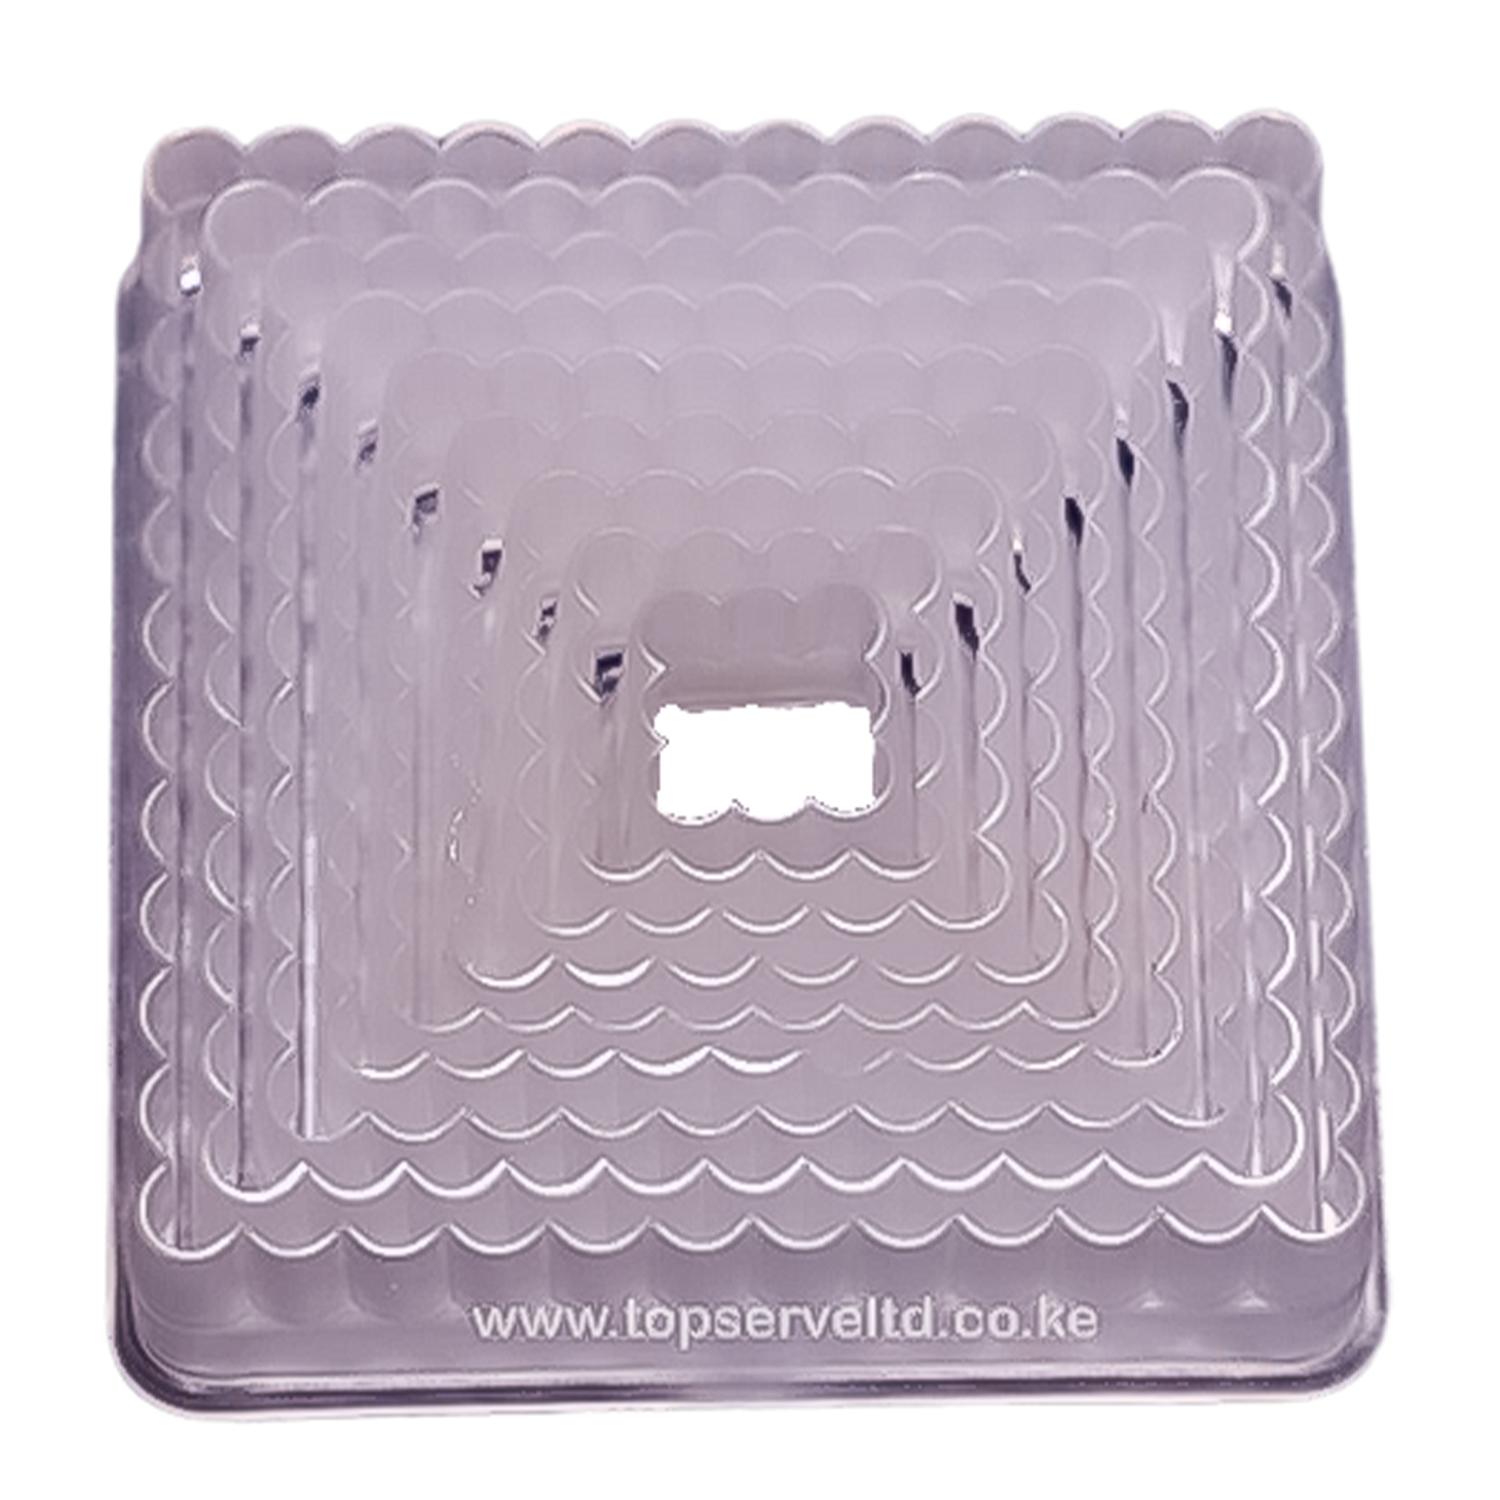 SET OF 9 CLEAR SERRATED PLASTIC SQUARE COOKIE CUTTER